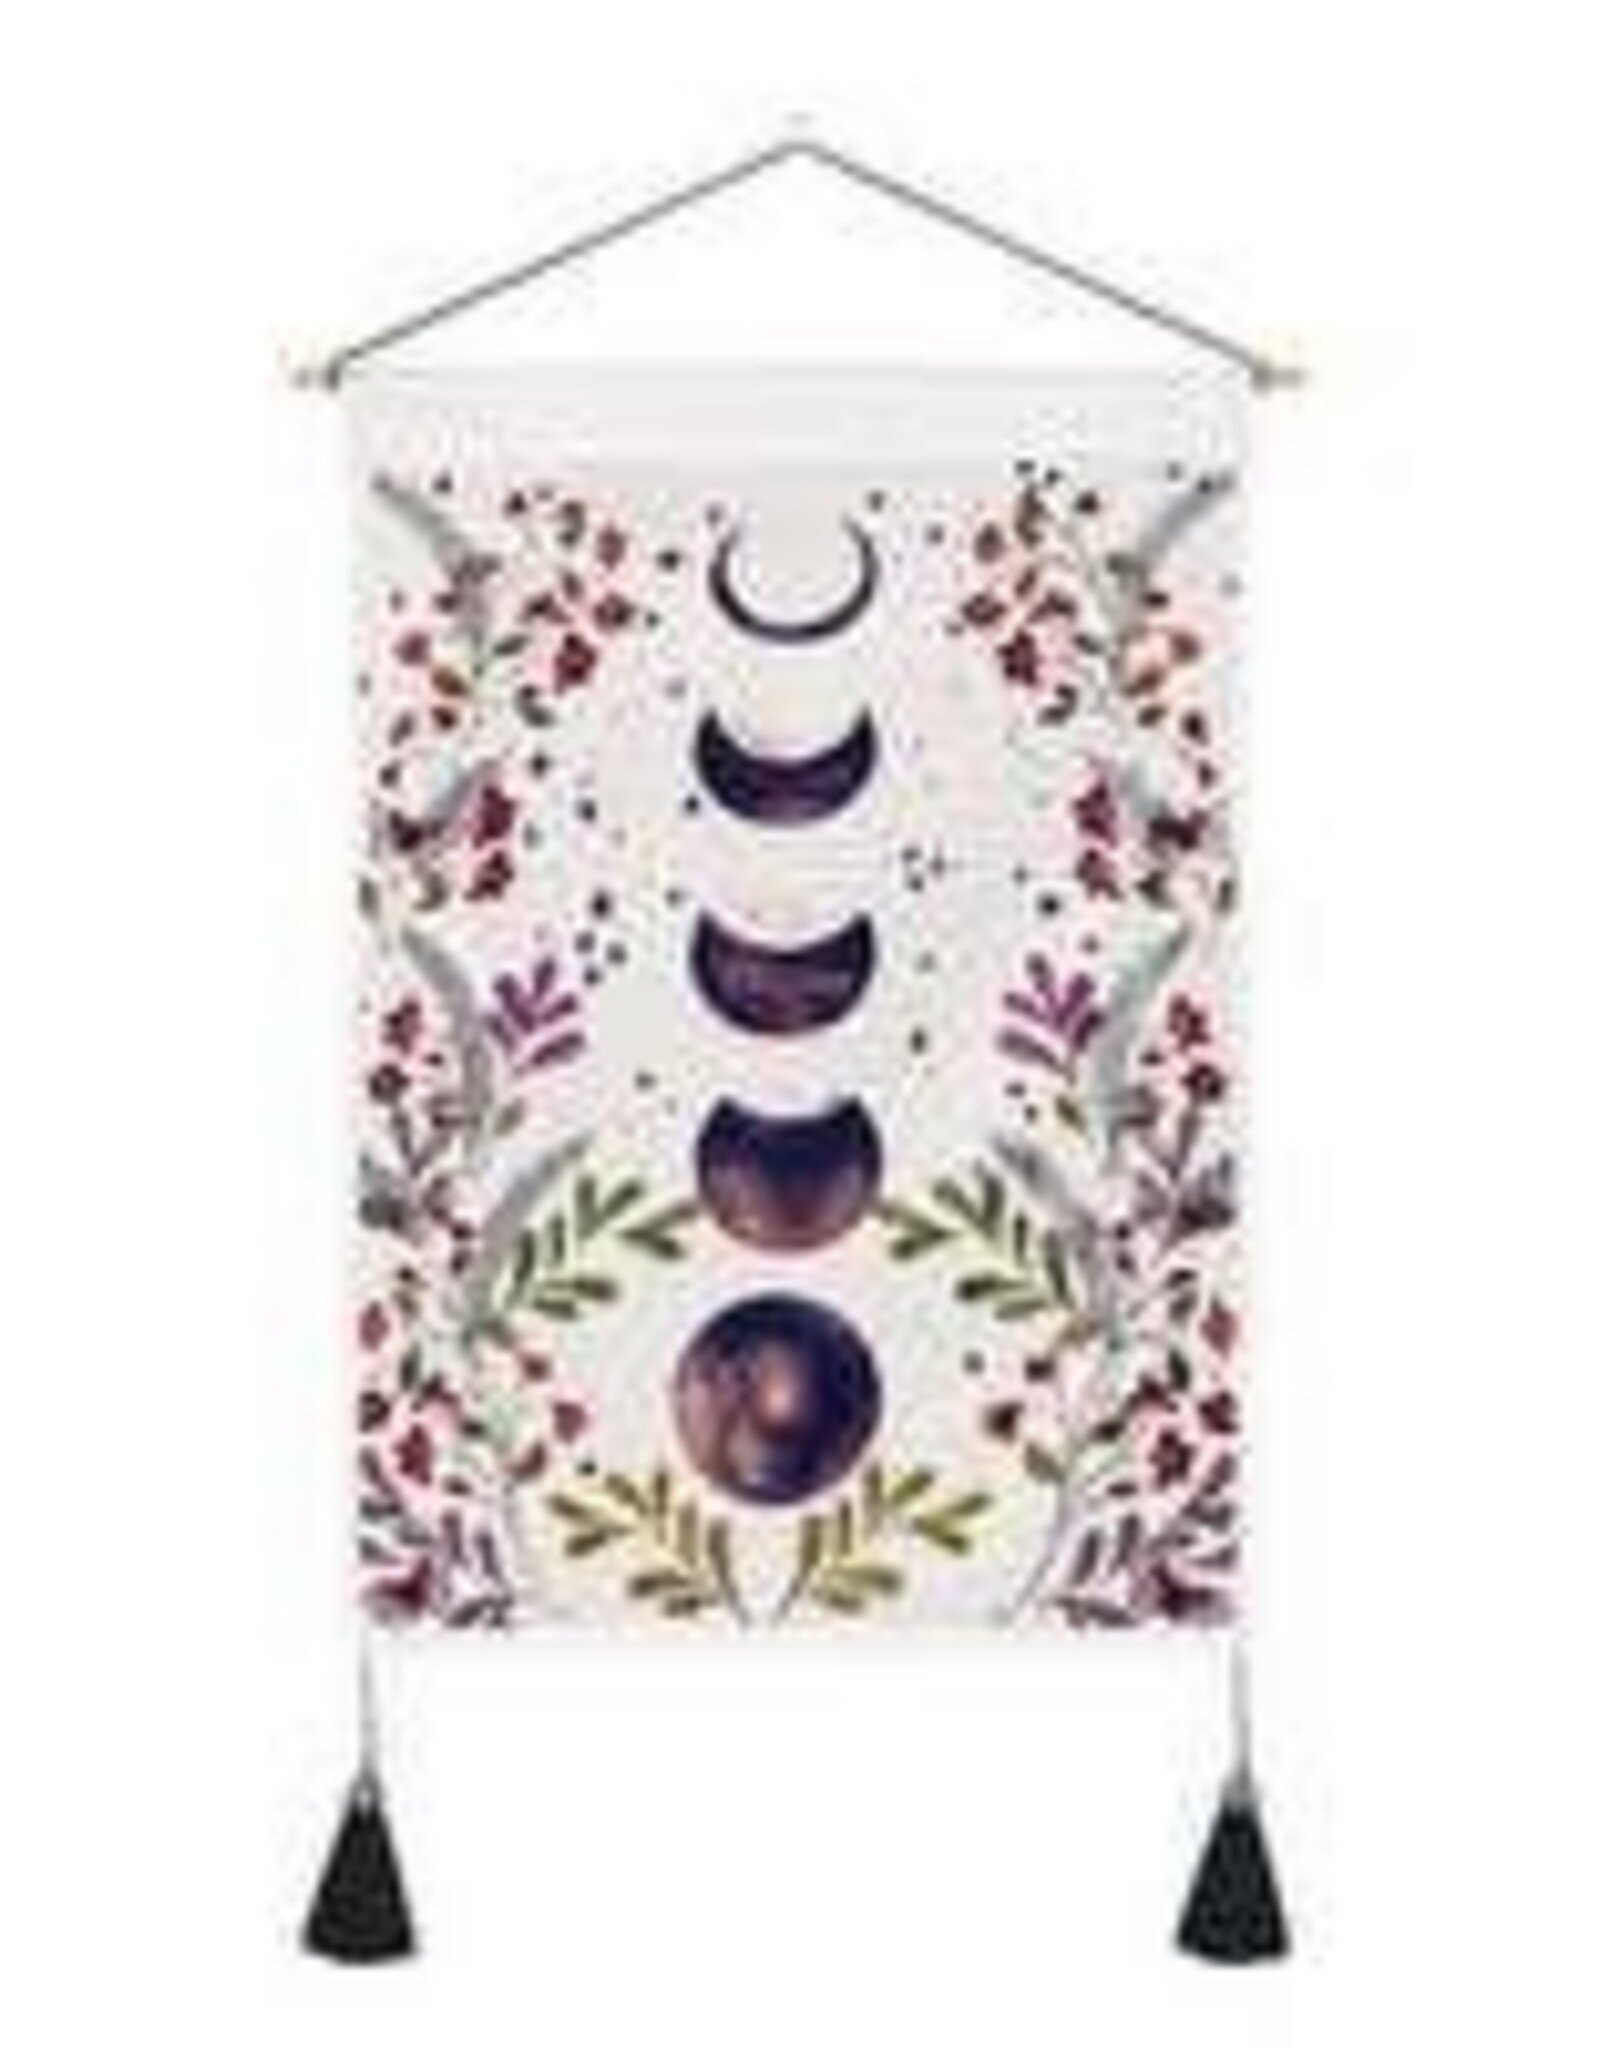 Floral Moon Phase Tapestry Wall Hanger - 13.75 wide x 19.5 inch long